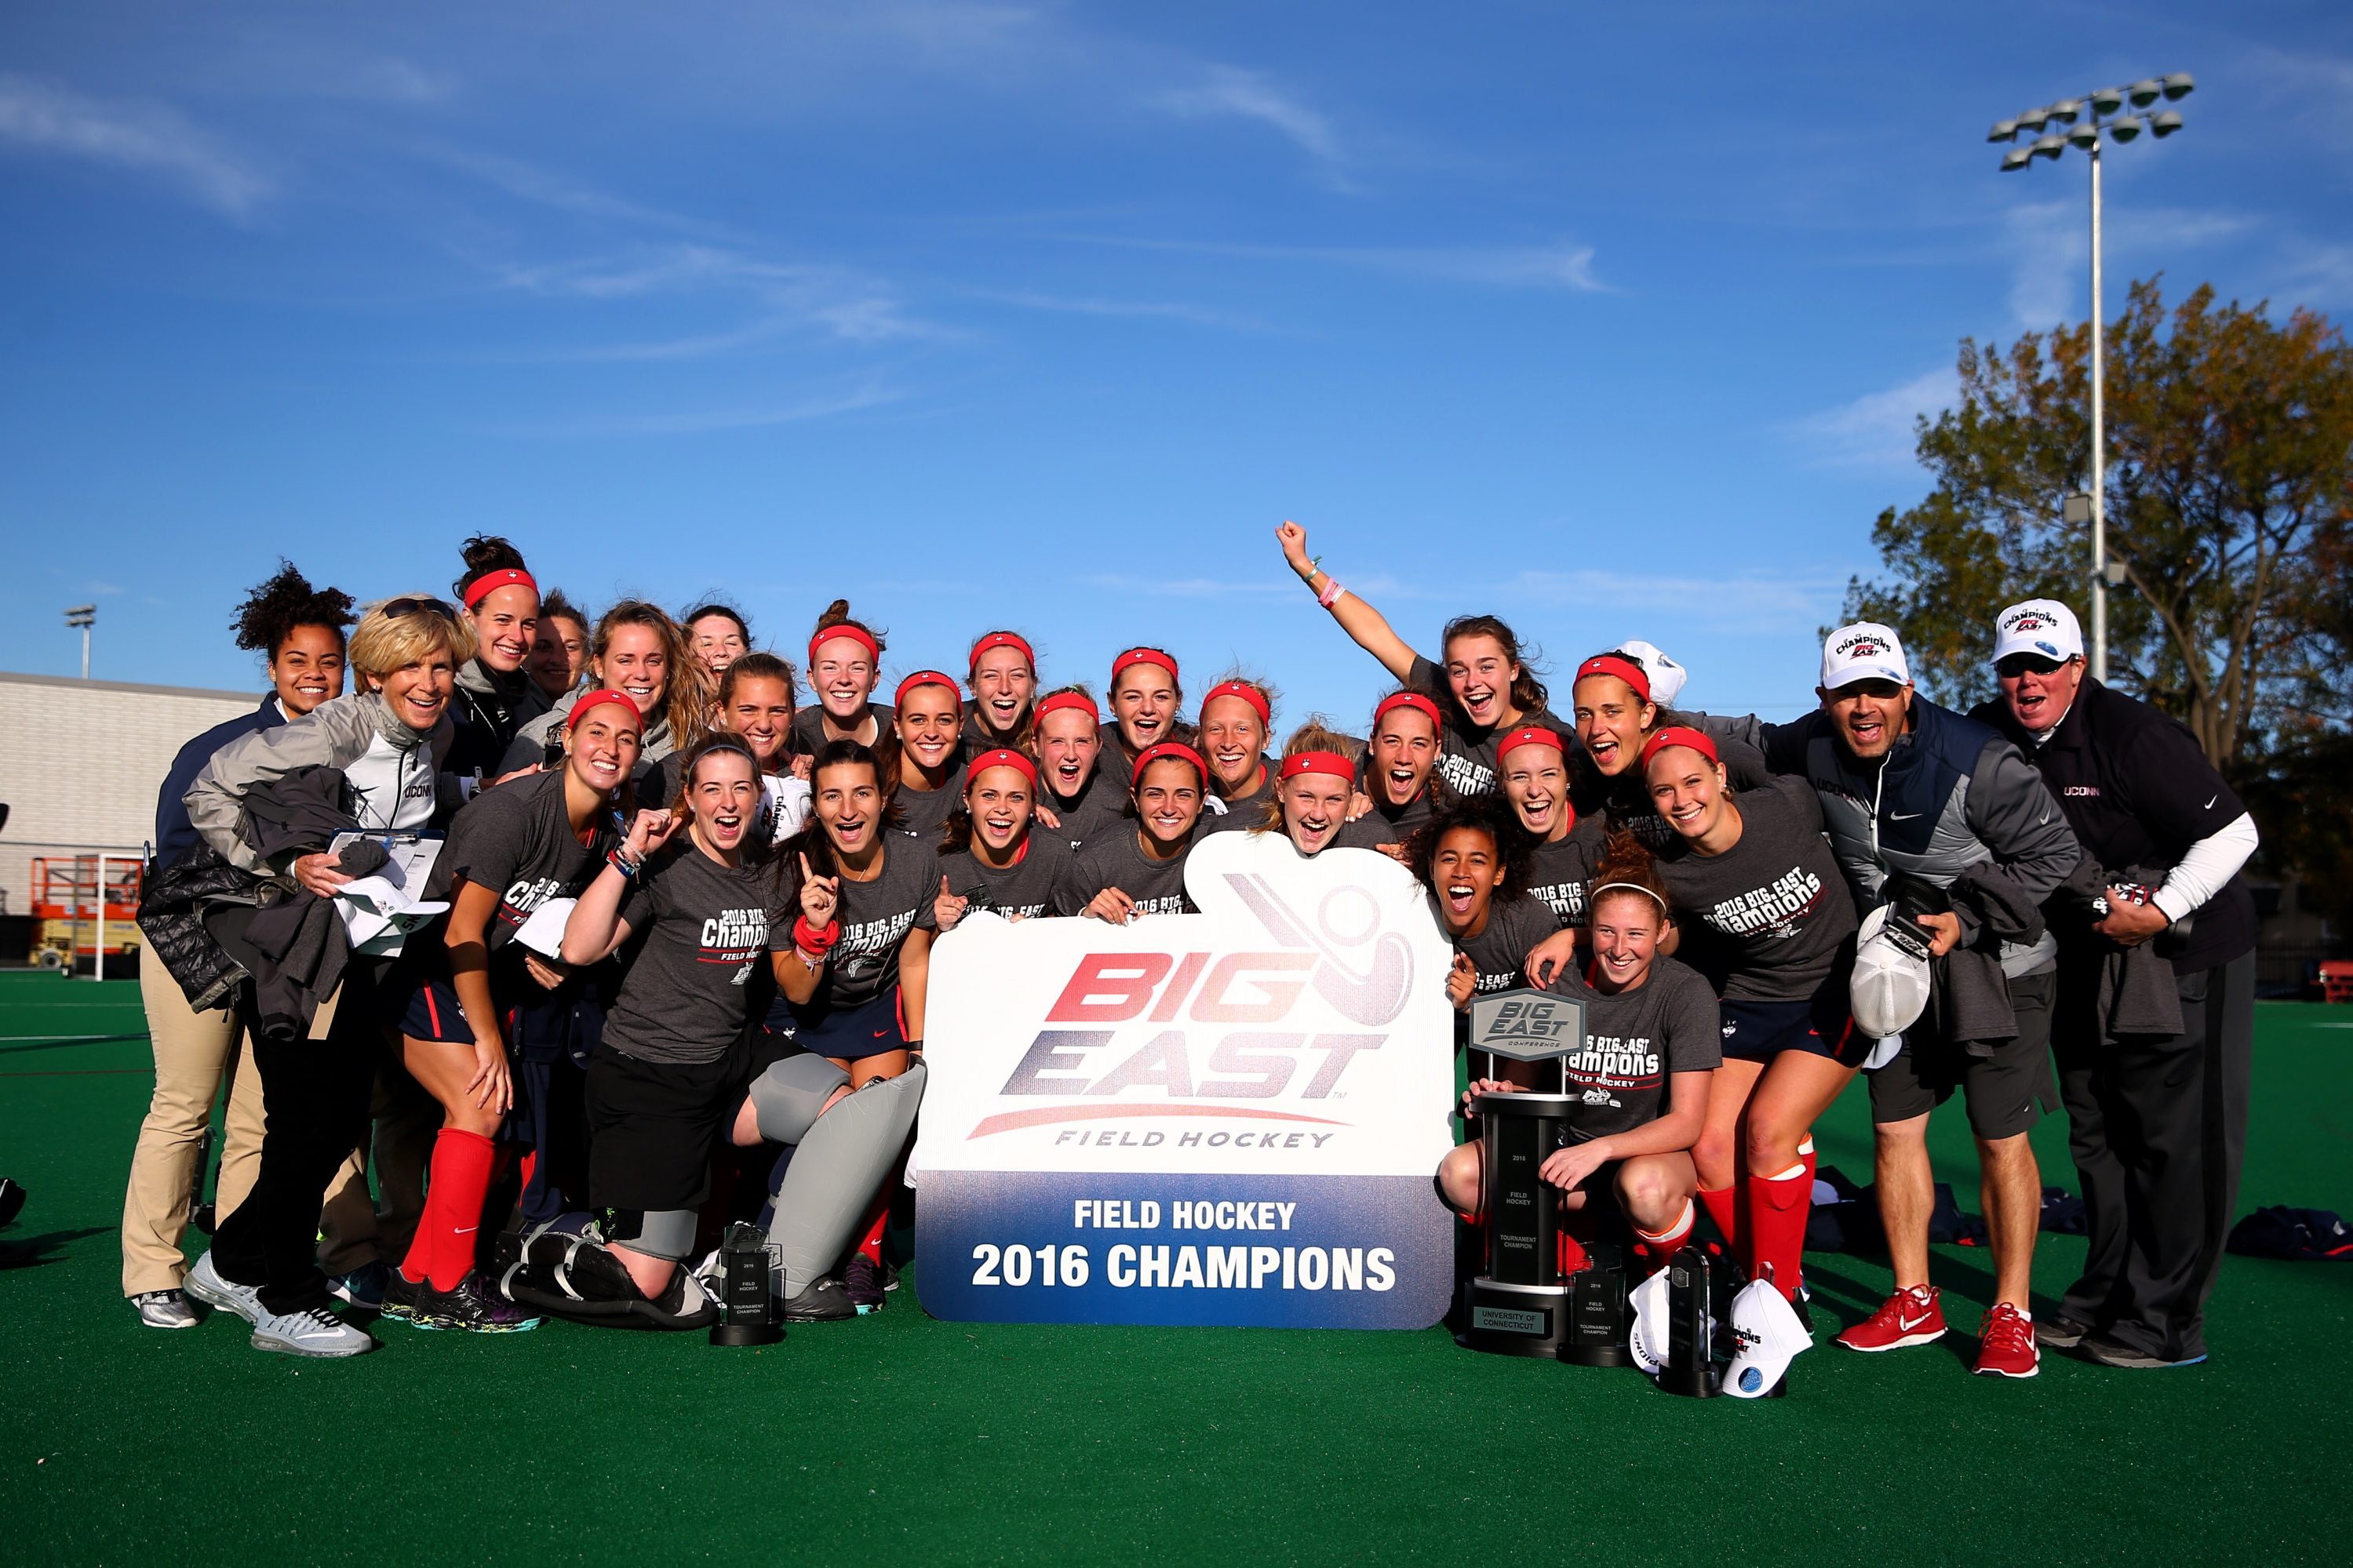 UConn defeated Liberty 3-2 to claim its fifth-straight Big East Tournament title, and will go on to play Boston College in the first round of the NCAA Tournament on Saturday. (Courtesy of Big East)